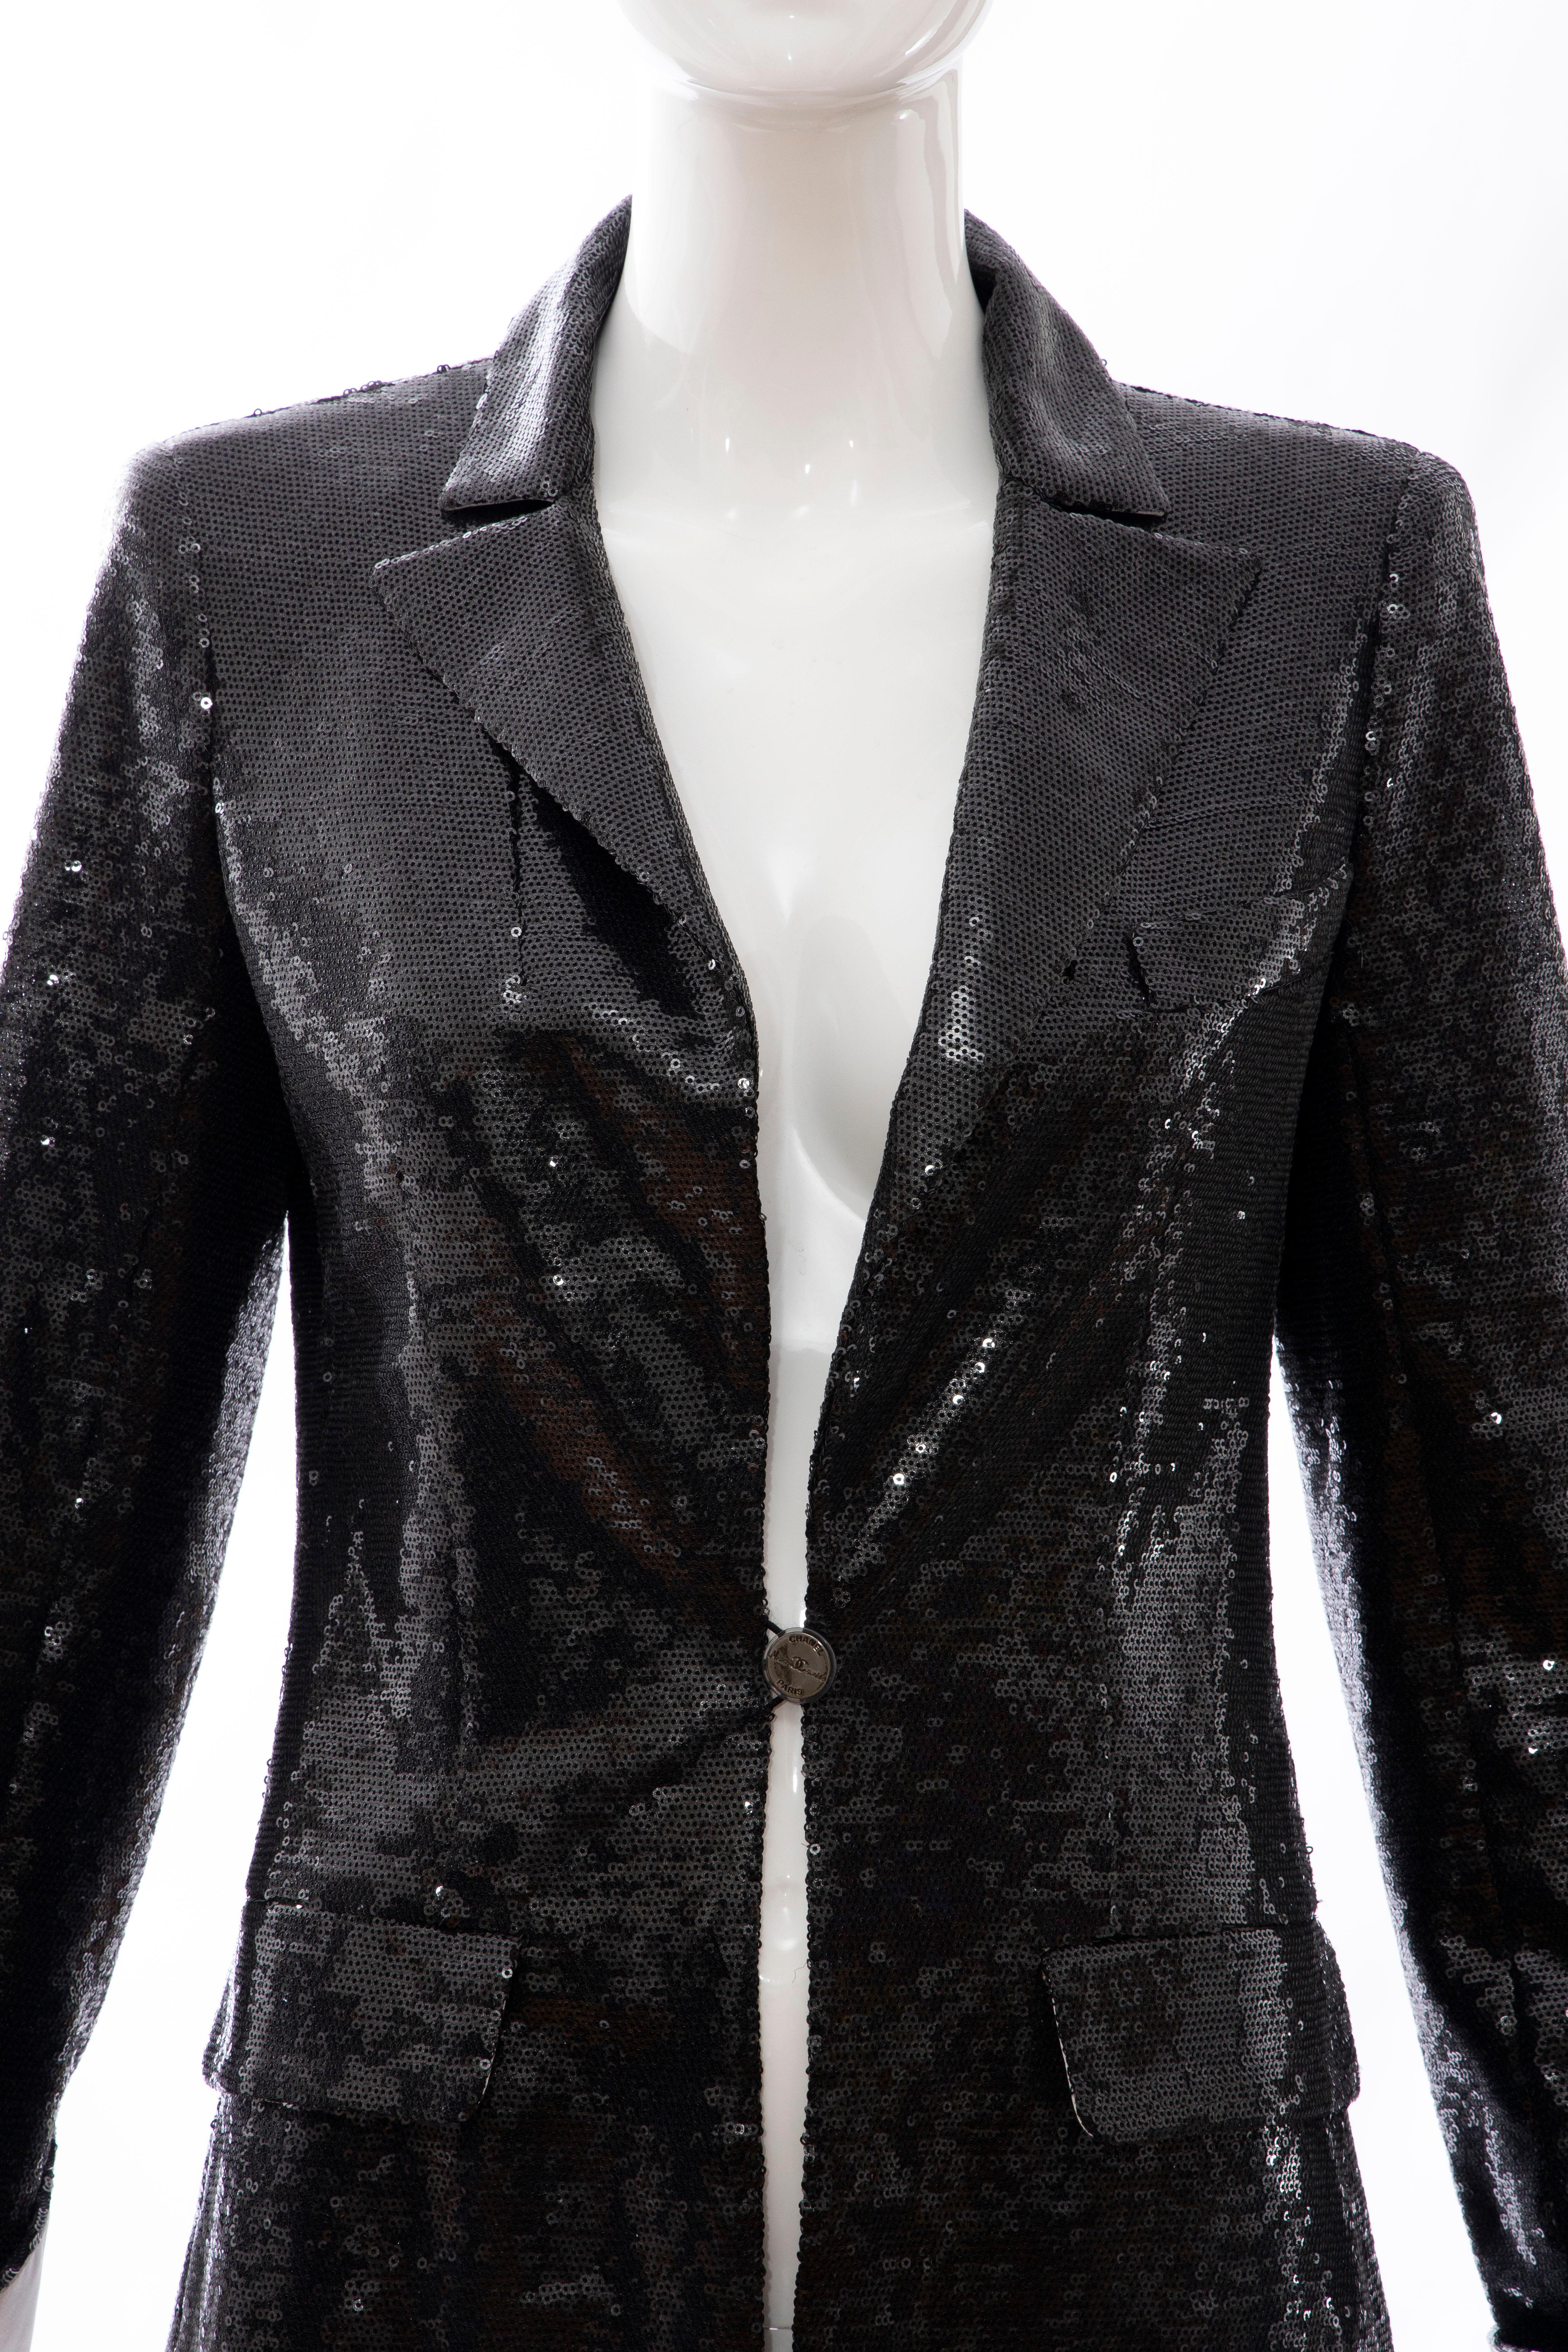 Chanel Black Embroidered Sequin Evening Jacket Ivory Silk Cuffs, Cruise 2009 For Sale 6